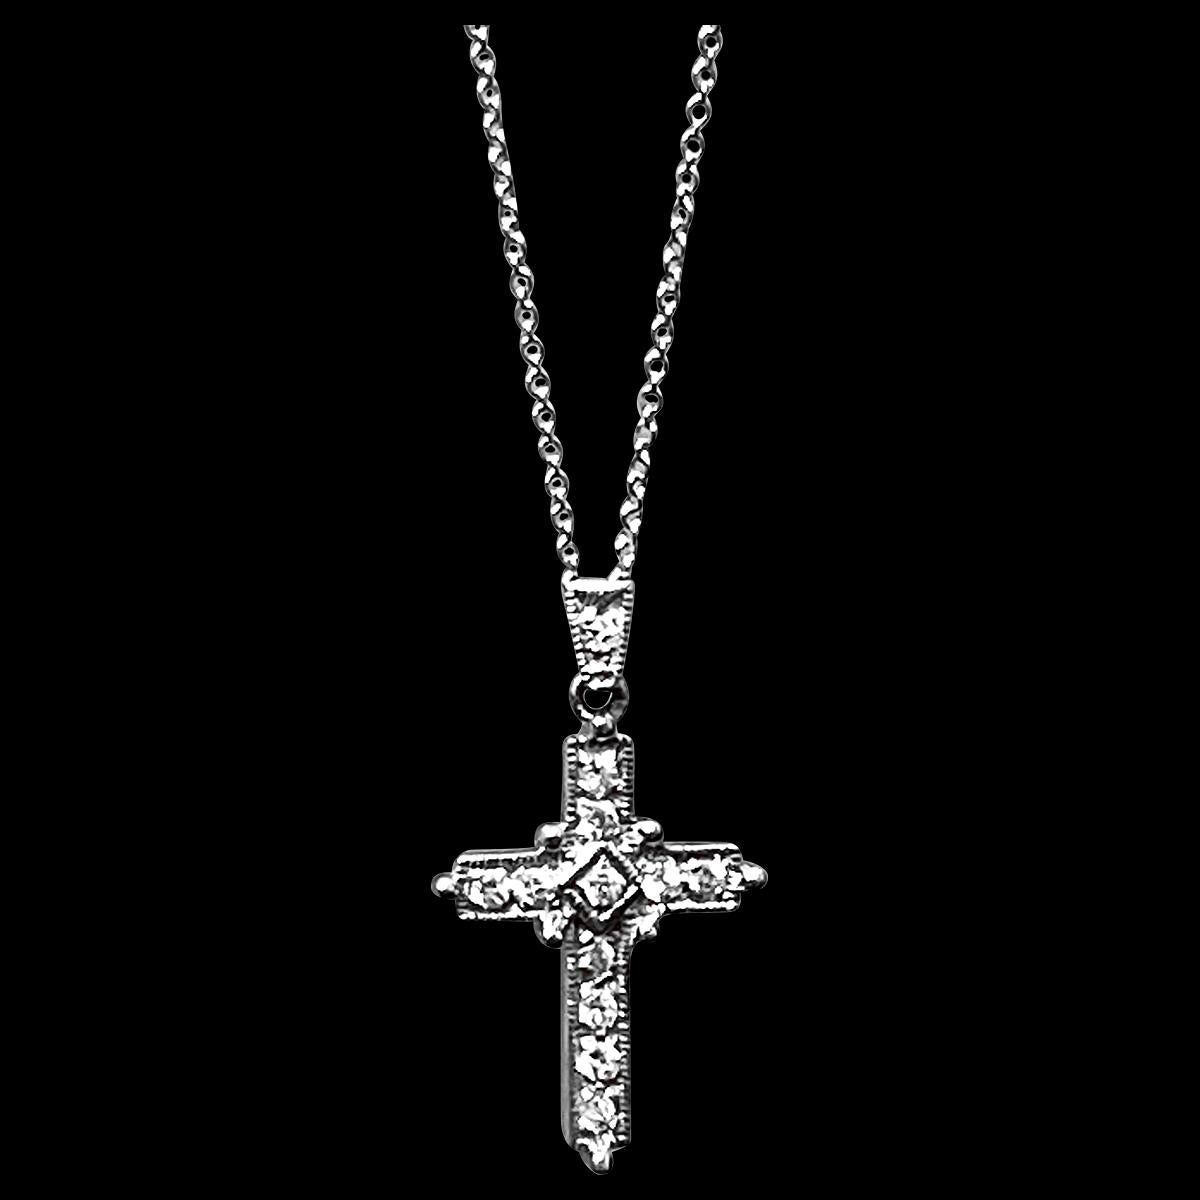 Round Cut White Diamond Cross Pendant with White Gold Necklace 18 Karat White Gold For Sale